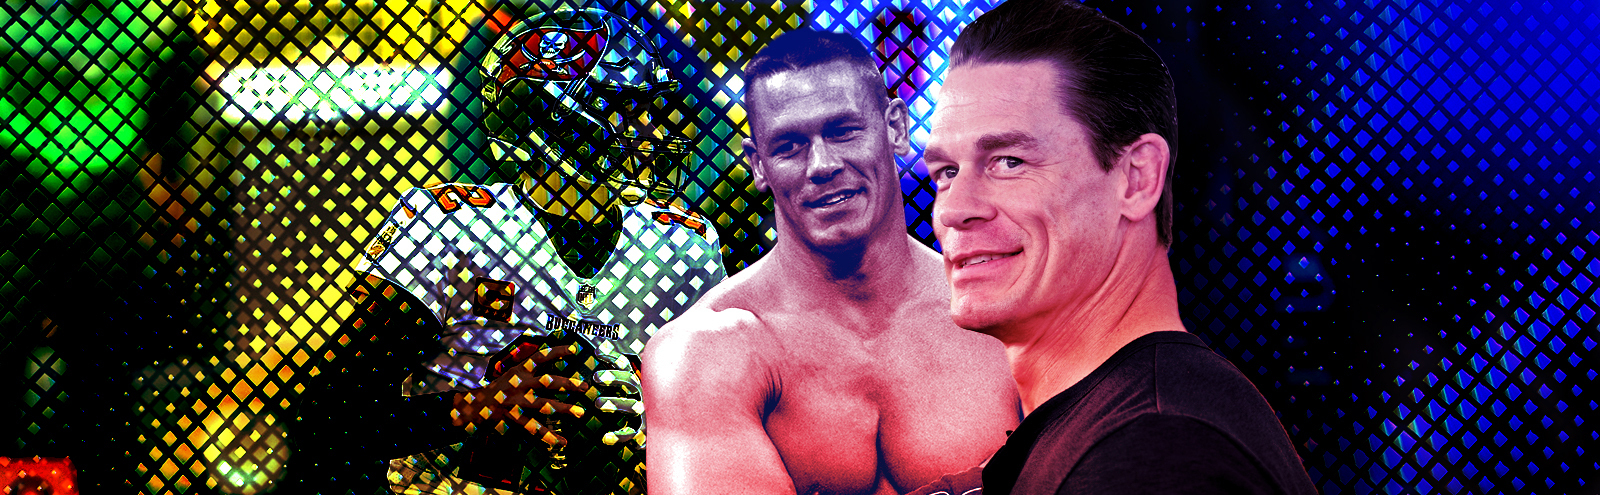 John Cena Talks Tom Brady, Super Bowl Ads, And How Staying Curious Guides His Career From WWE To Acting